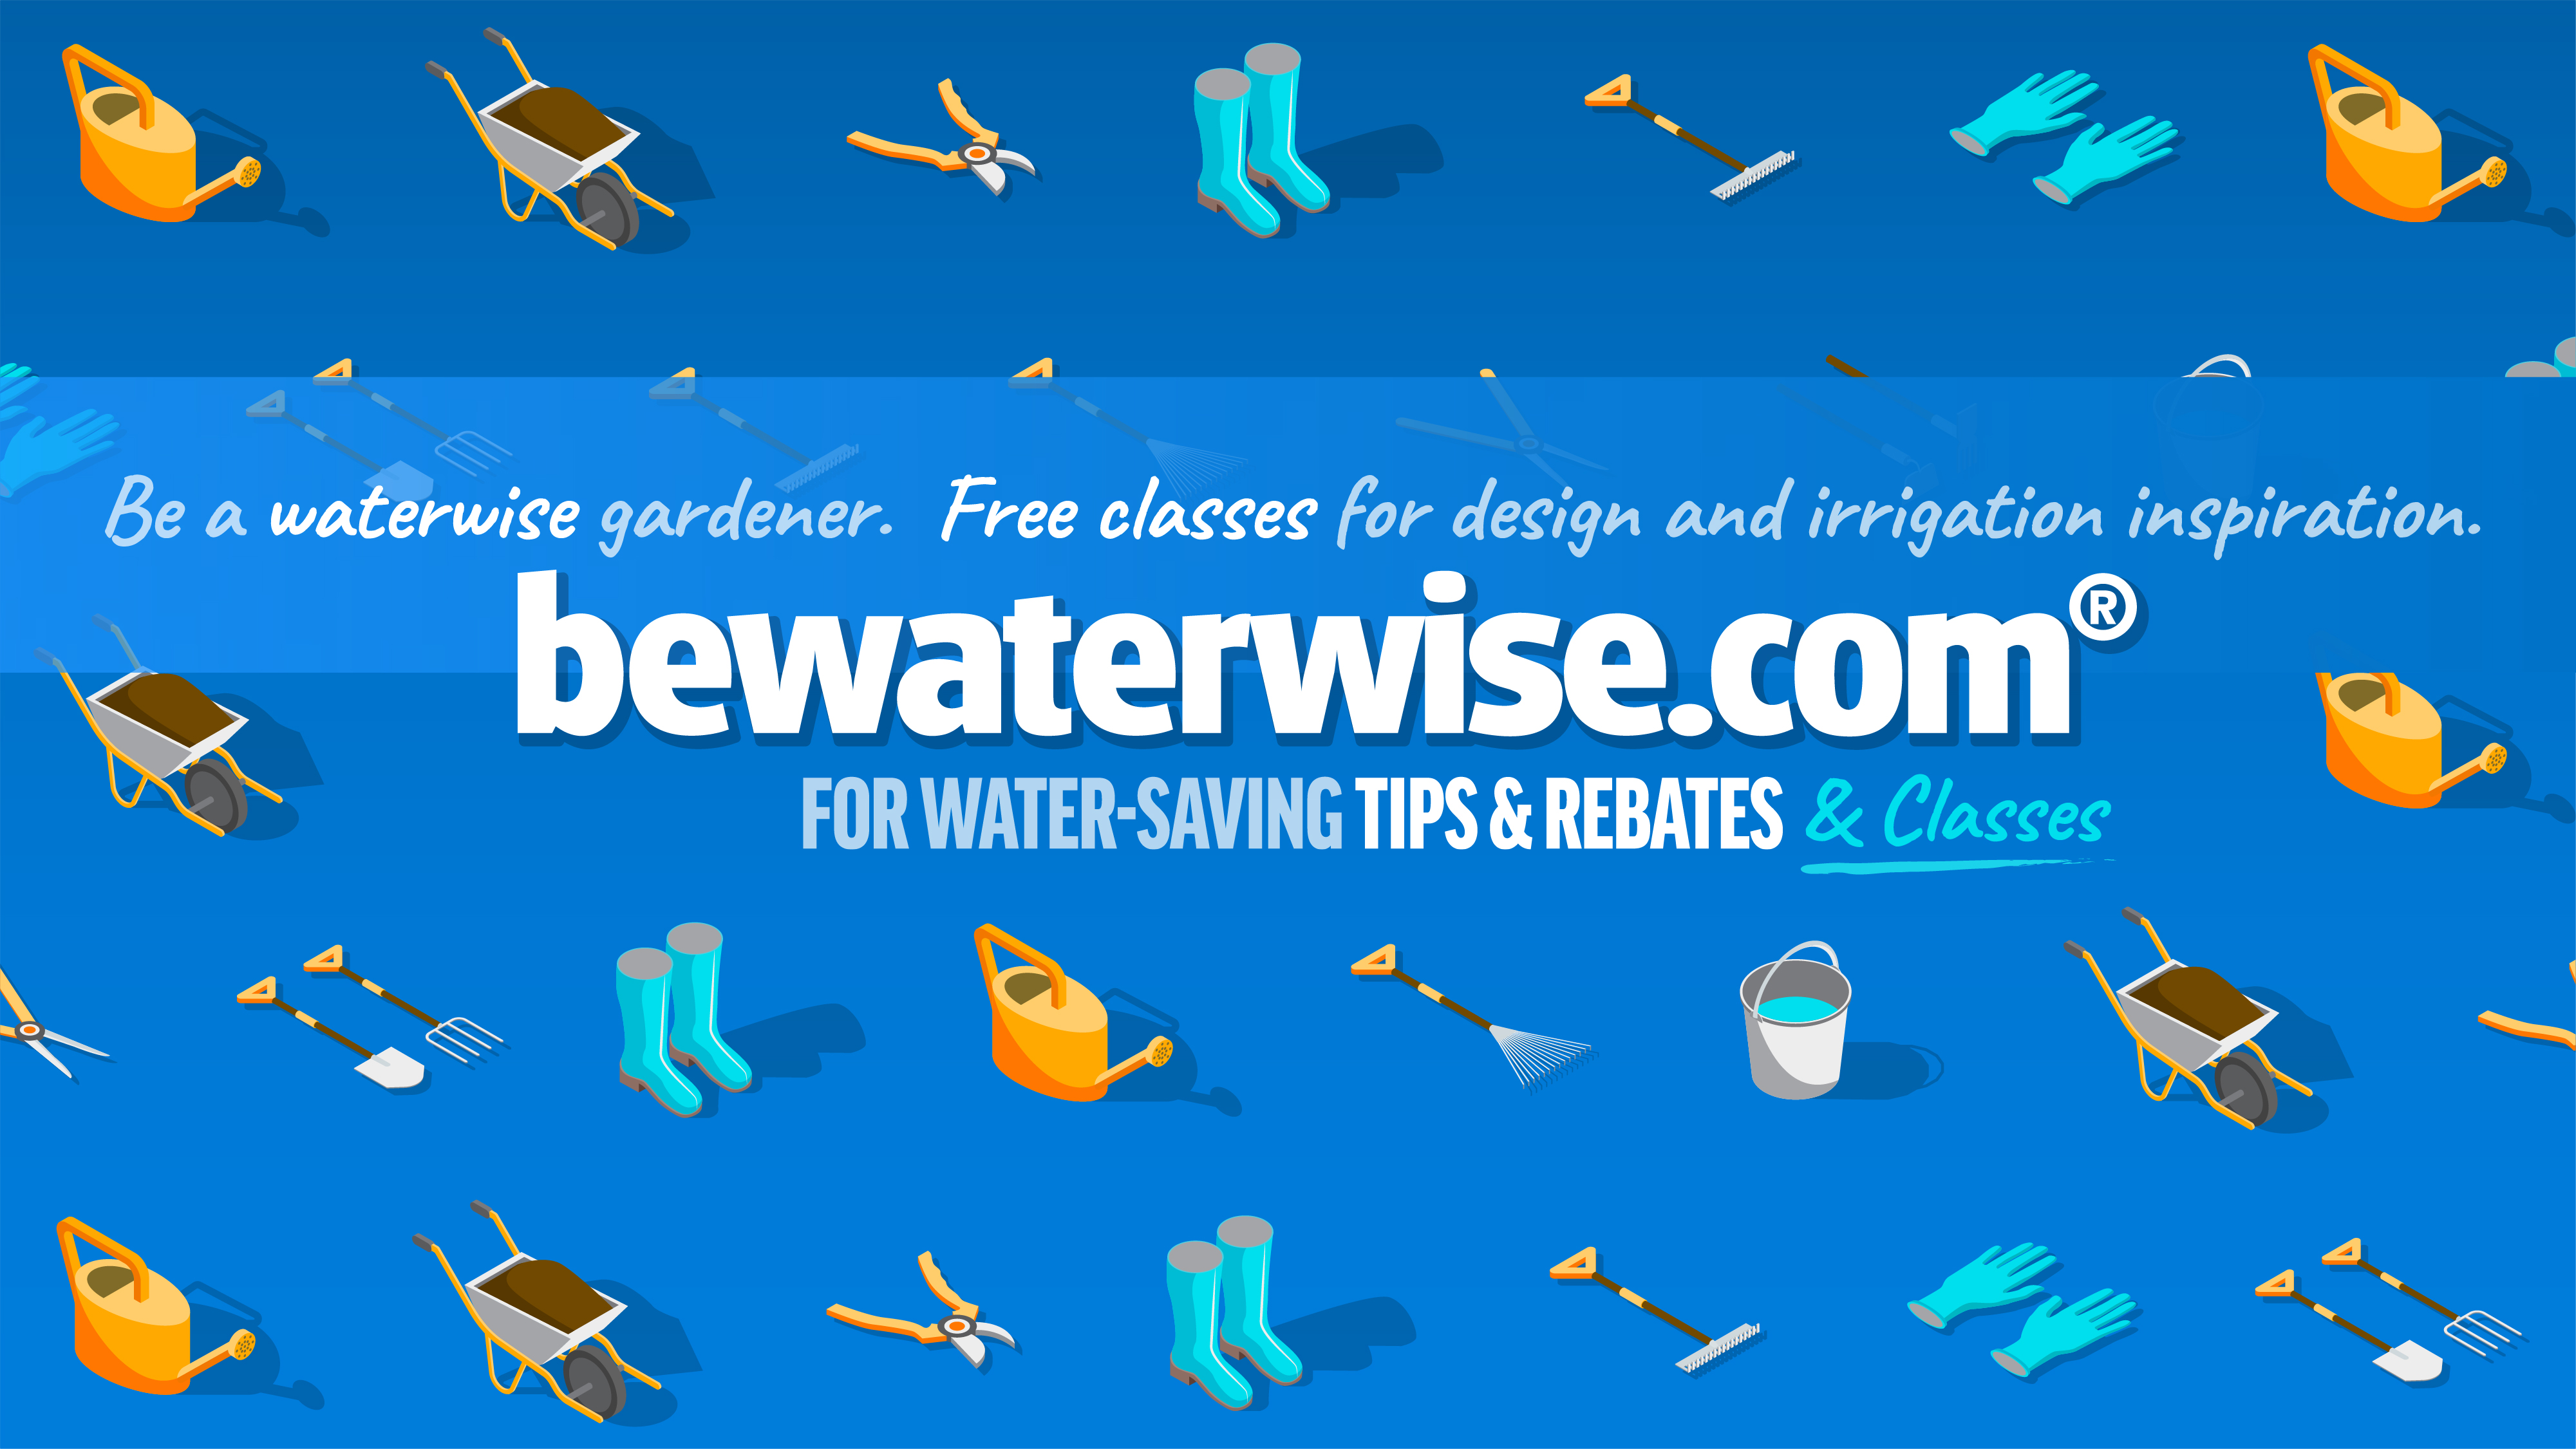 Bewaterwise.com Tips and Rebates